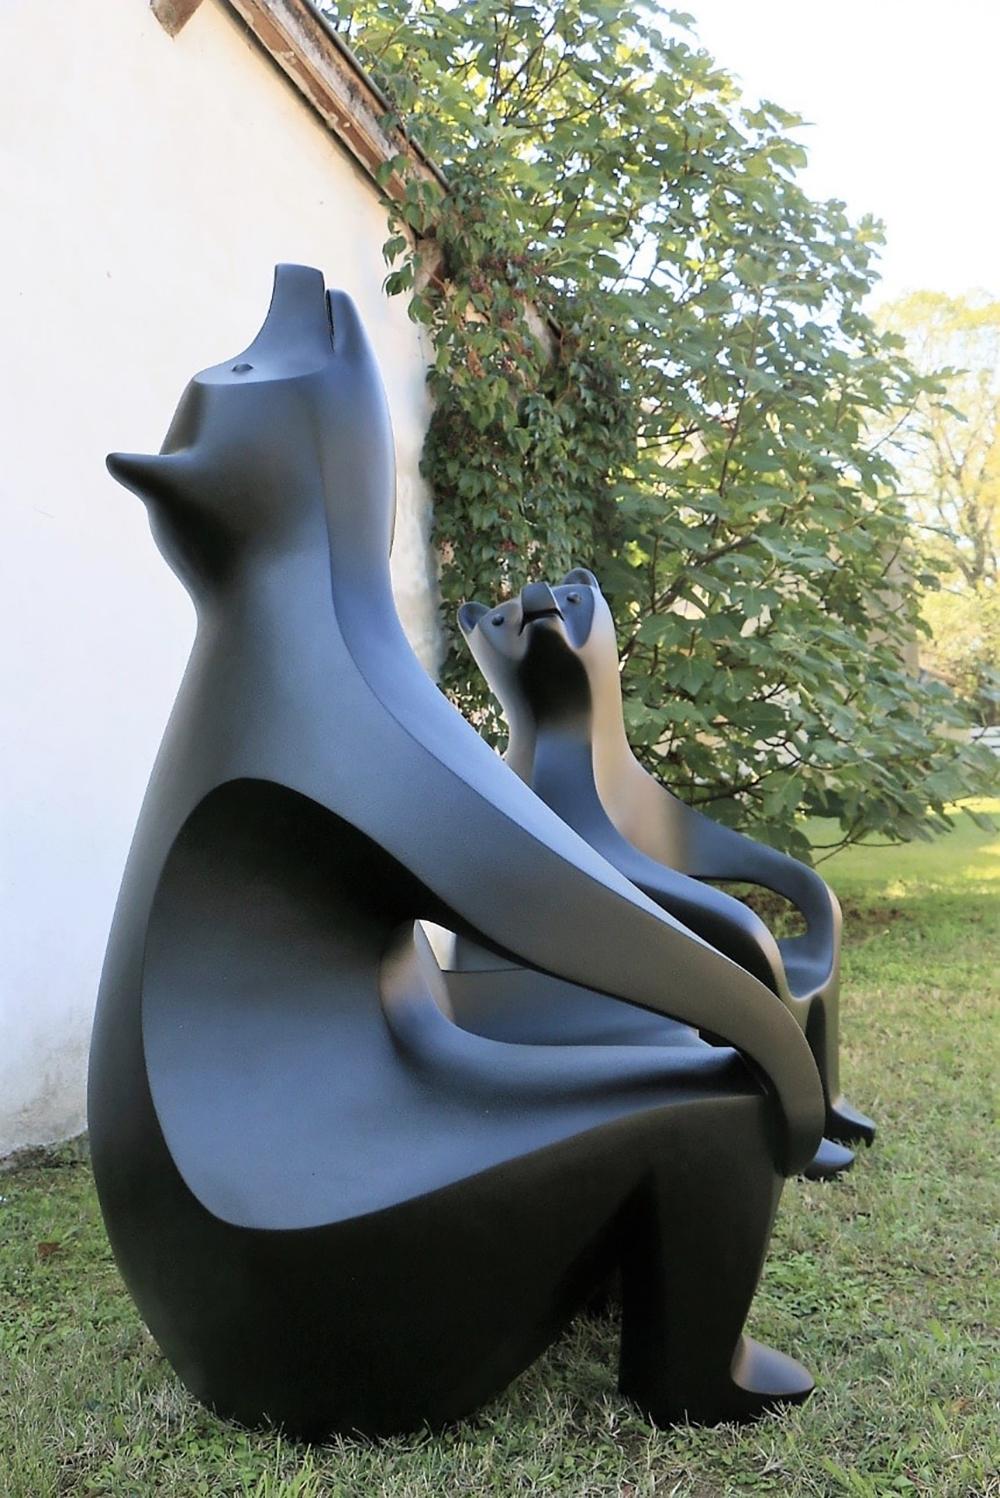 The Great Bear by Eric Valat - Functional sculpture (armchair), polyester For Sale 2